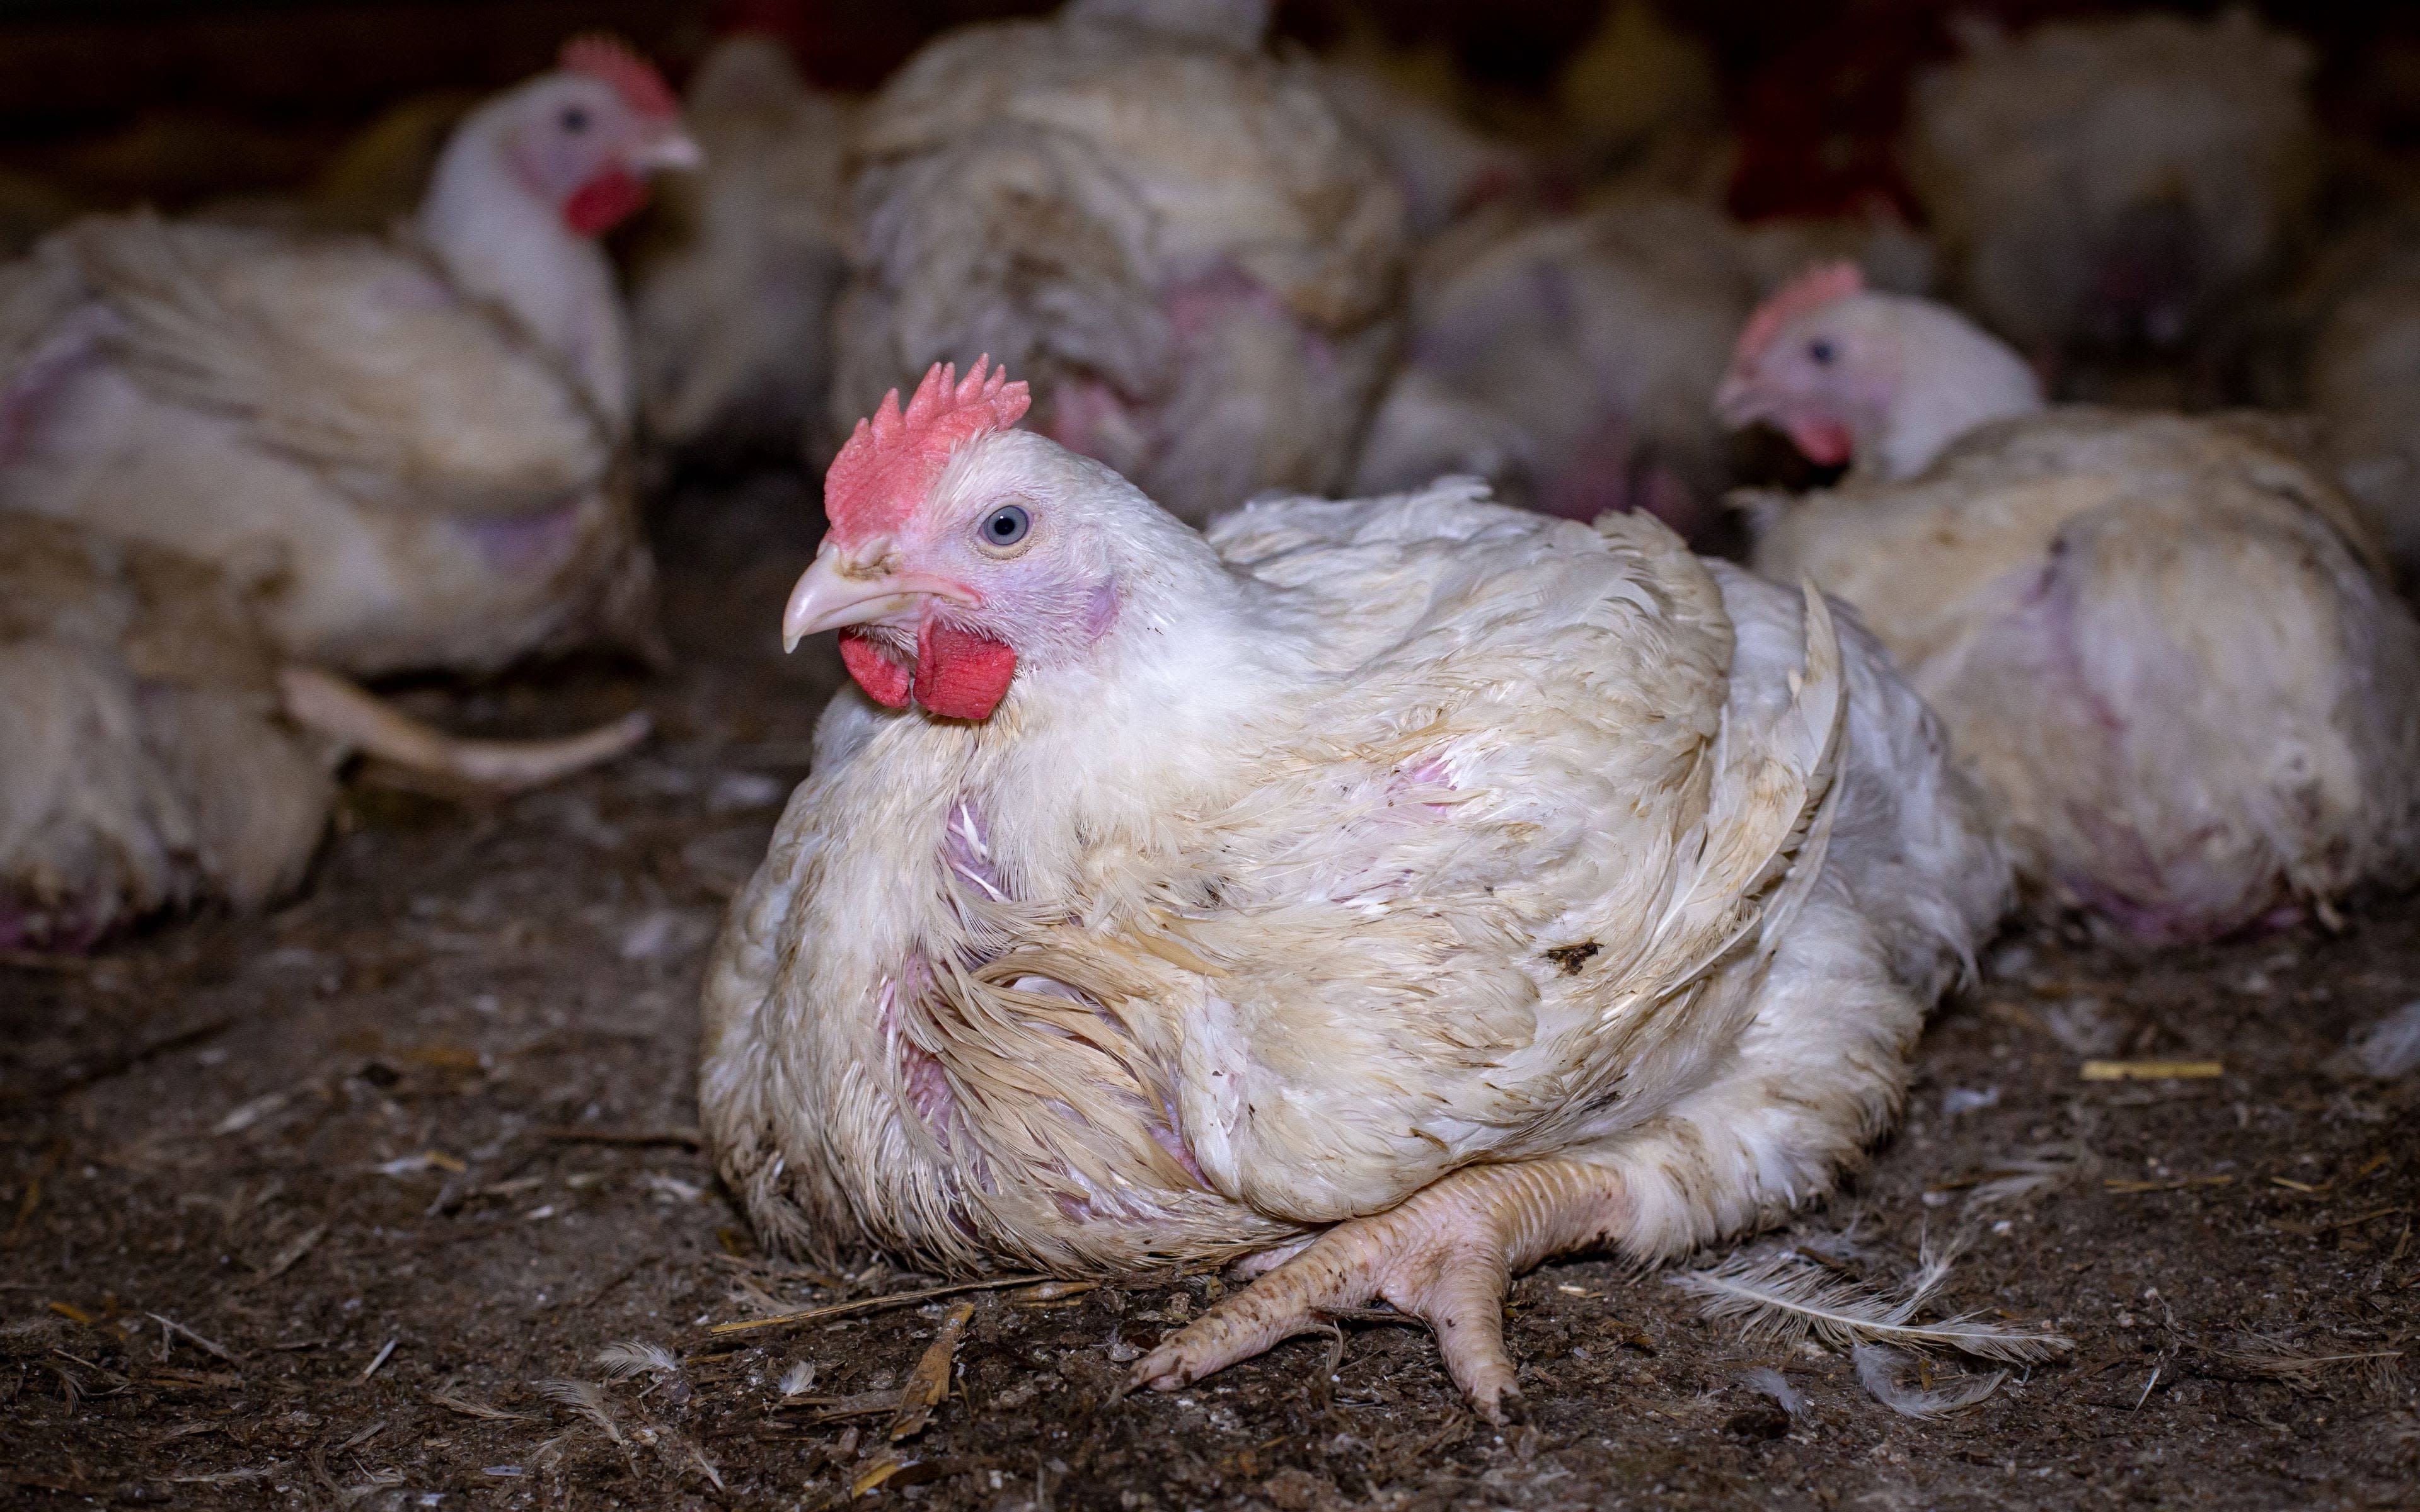 What Are Broiler Chickens and How Long Do They Live?